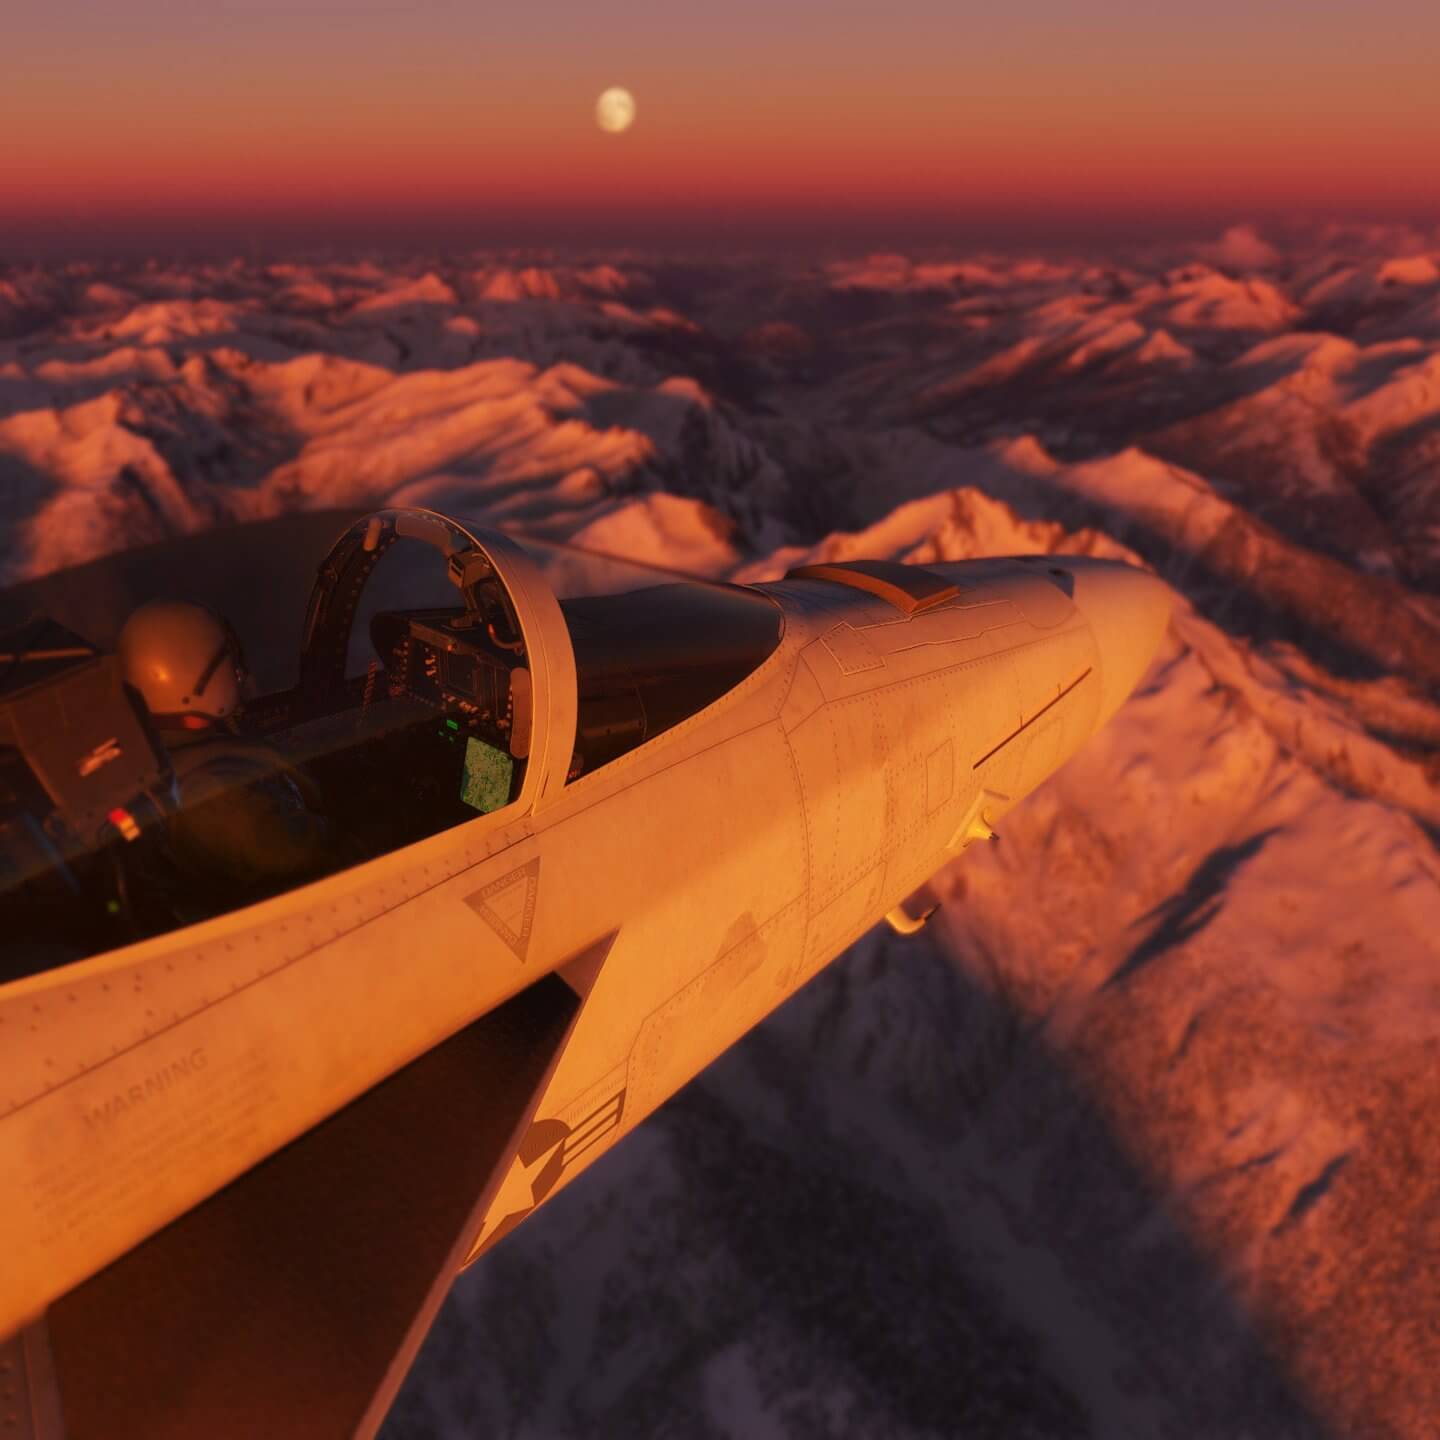 An F-18 Hornet cruises above snowy mountains